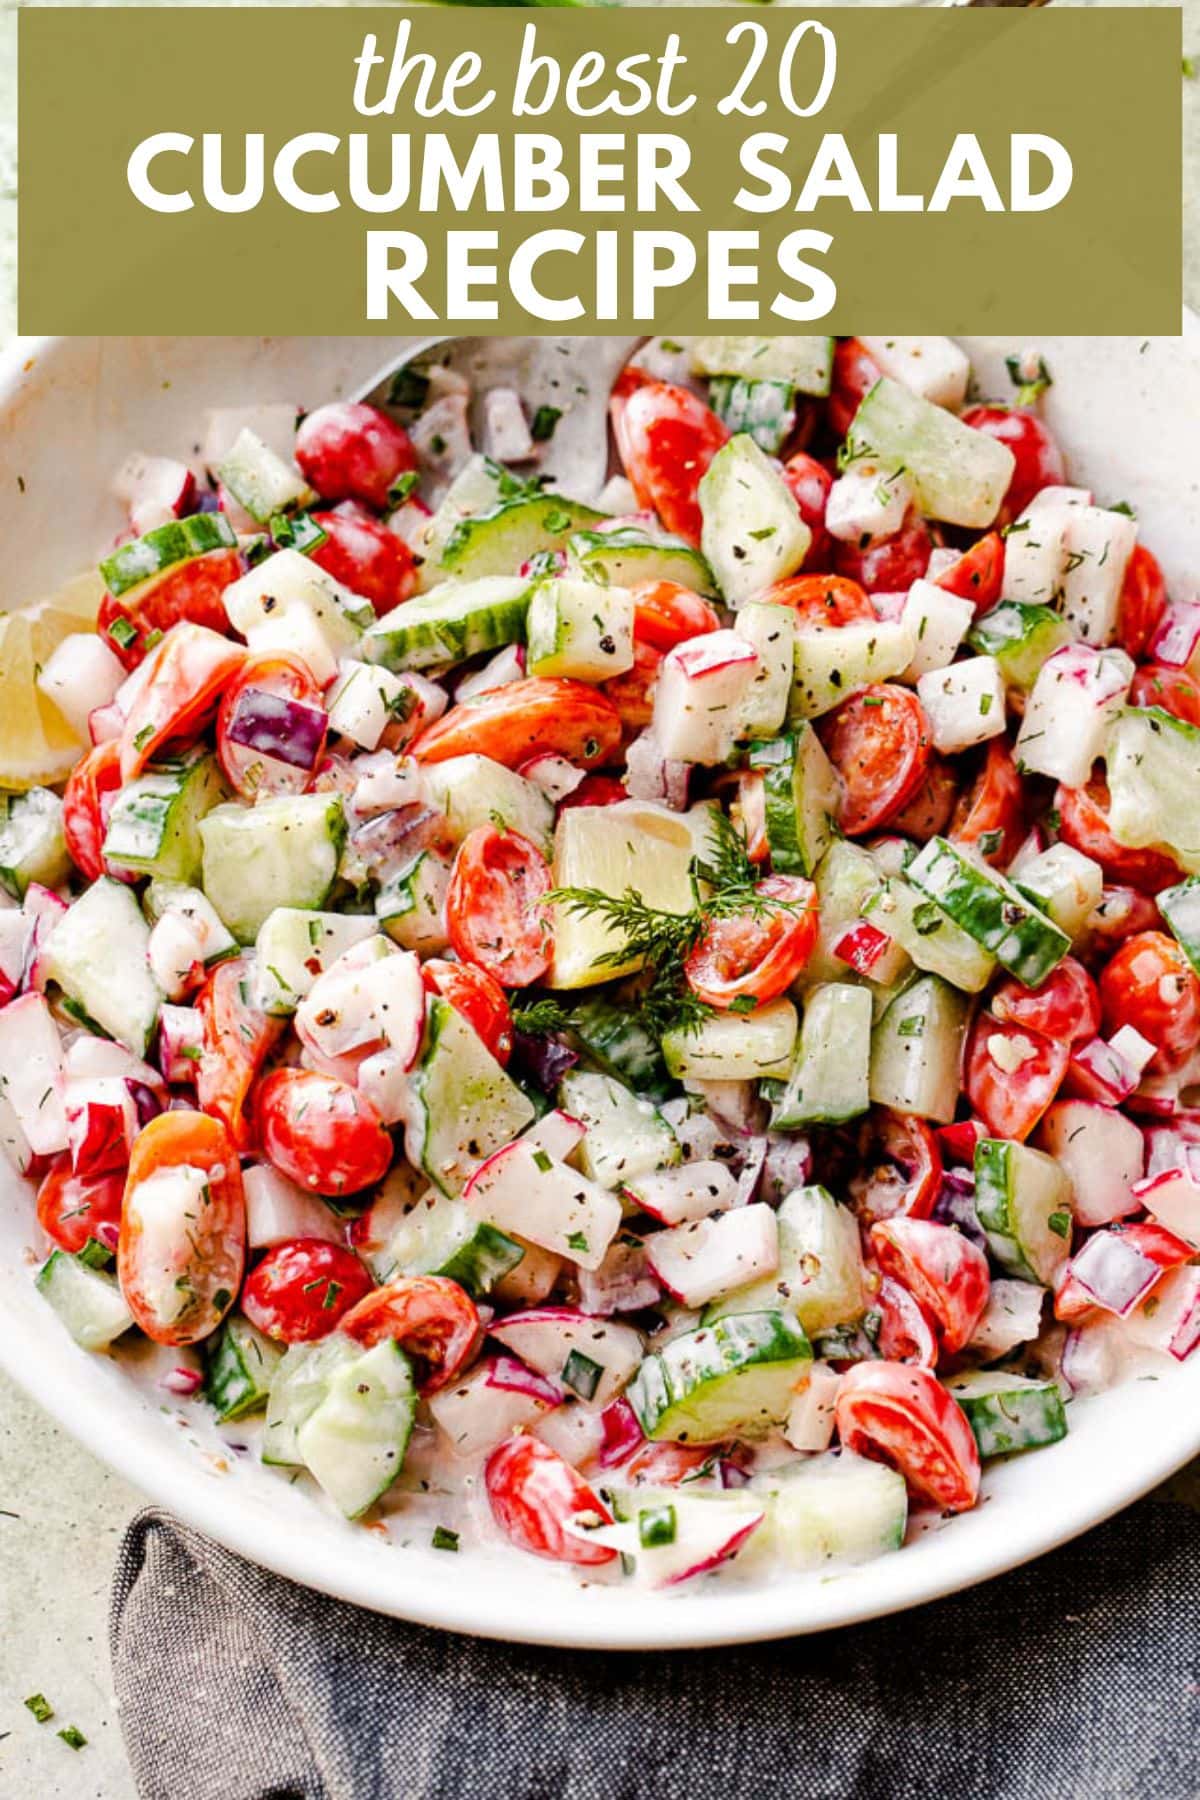 Photo of cucumber, radishes, and tomato salad, with text overlay.